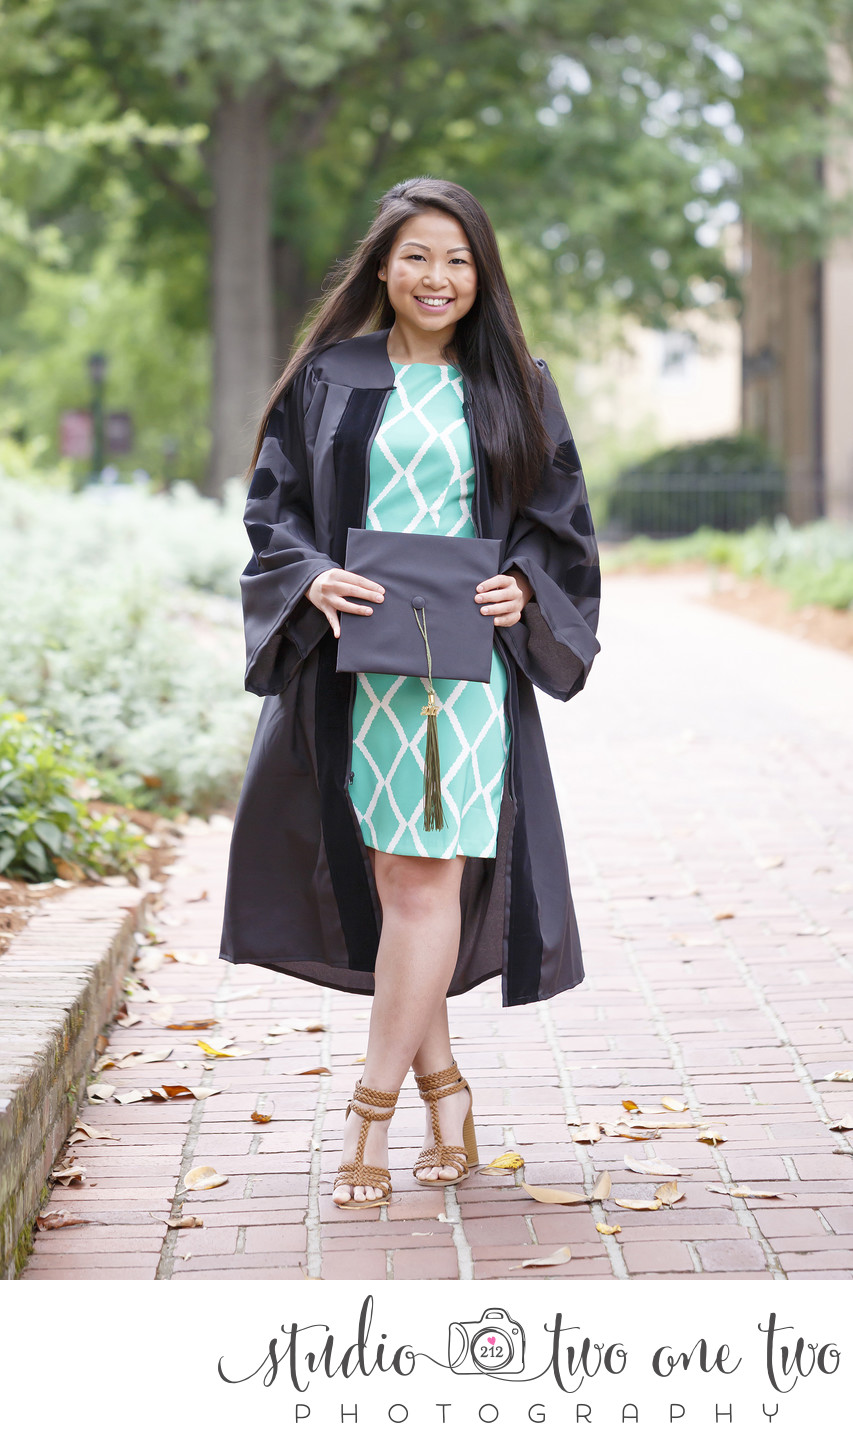 Cap and gown photographer in Columbia SC